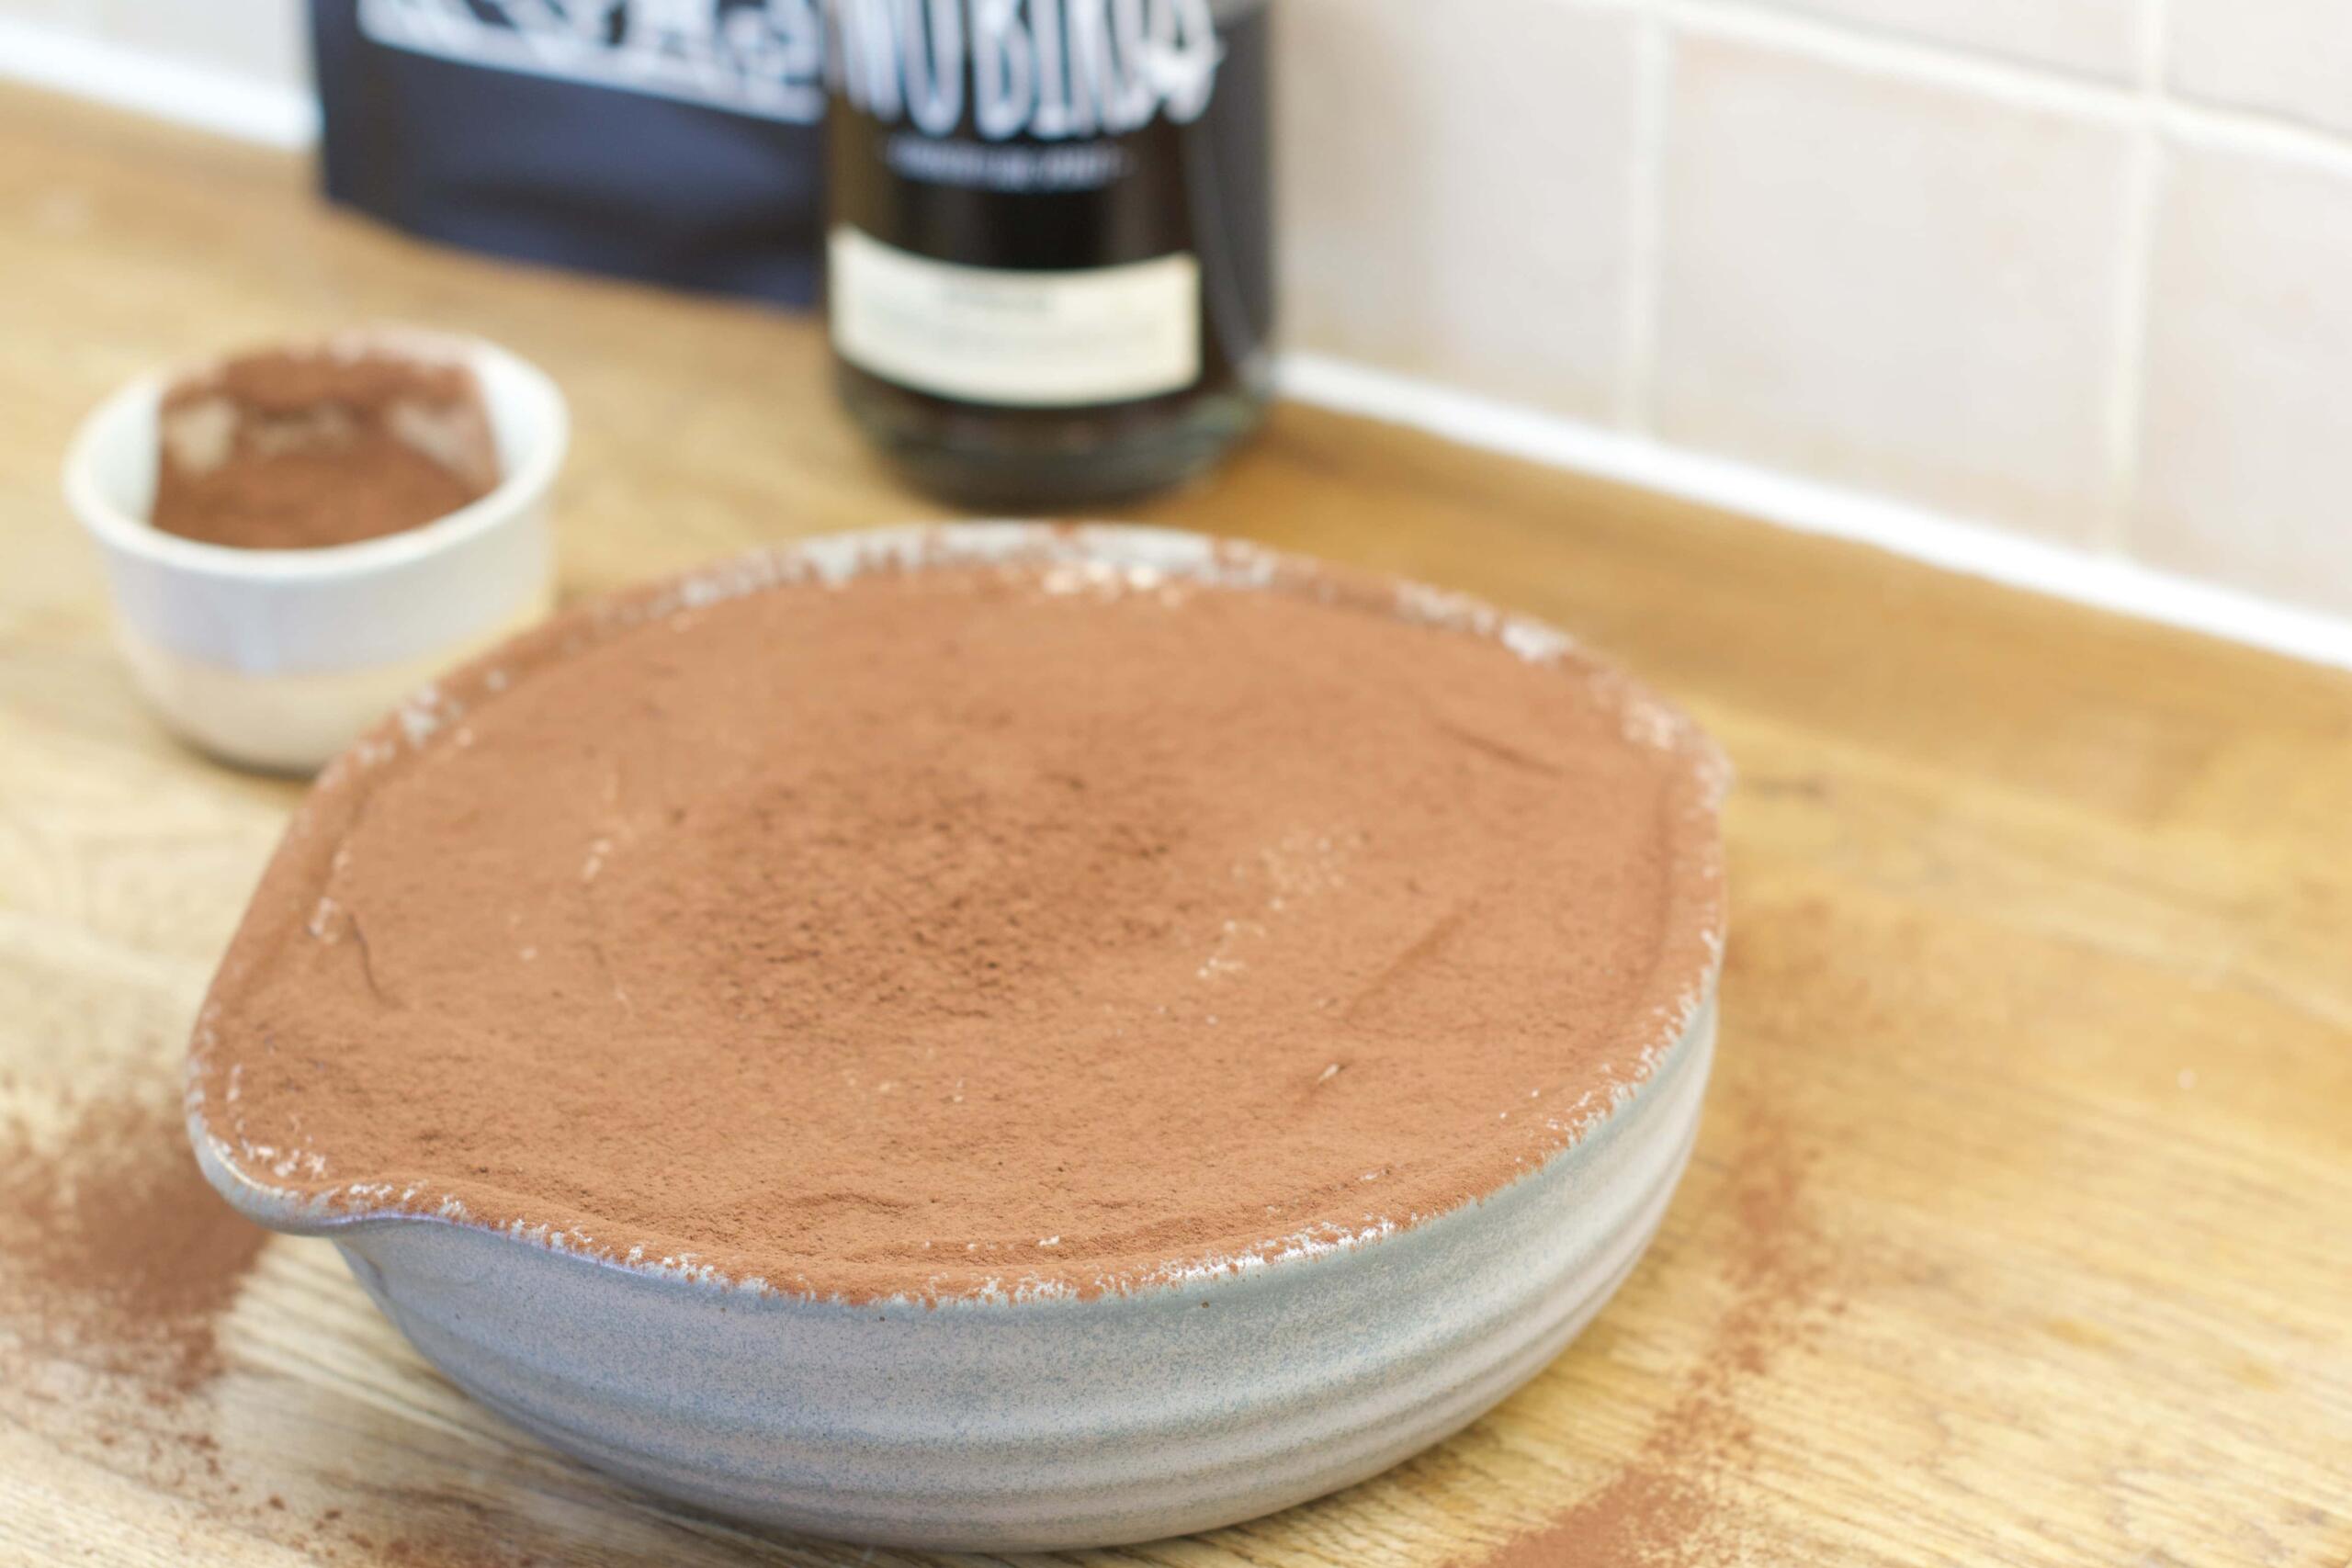 cover the top layer with a coating of cocoa powder and serve